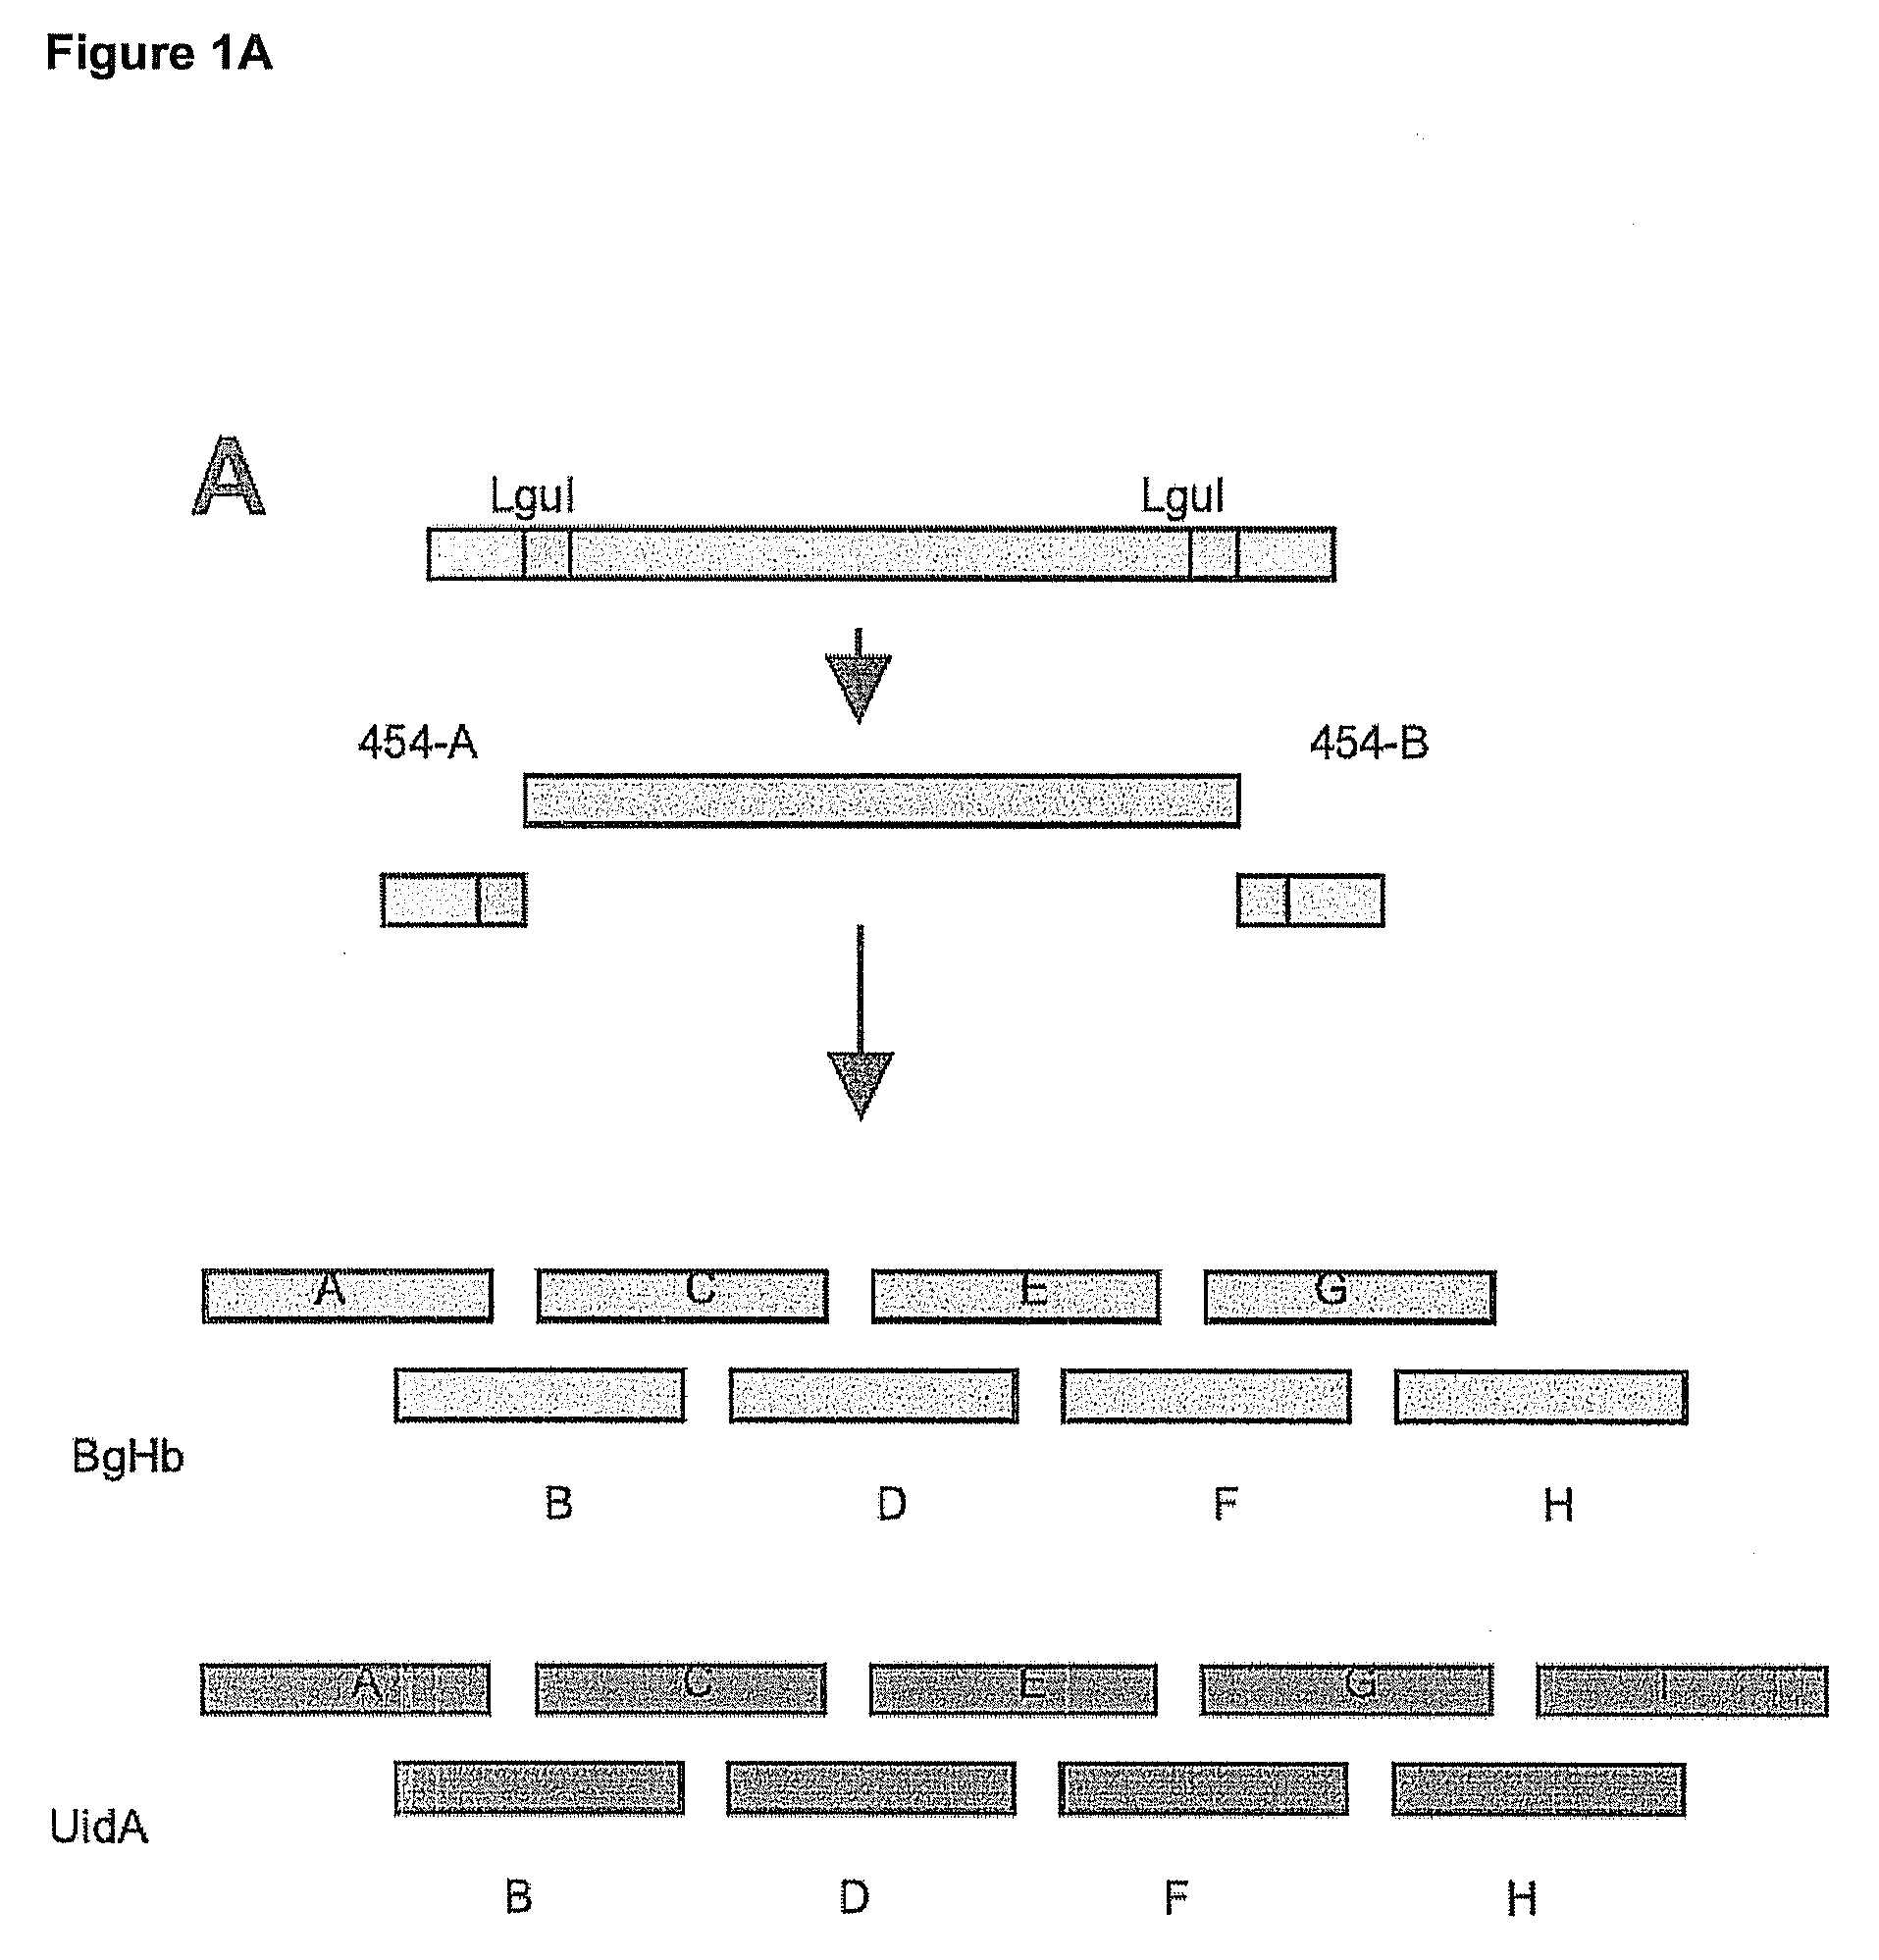 Synthesis of sequence-verified nucleic acids